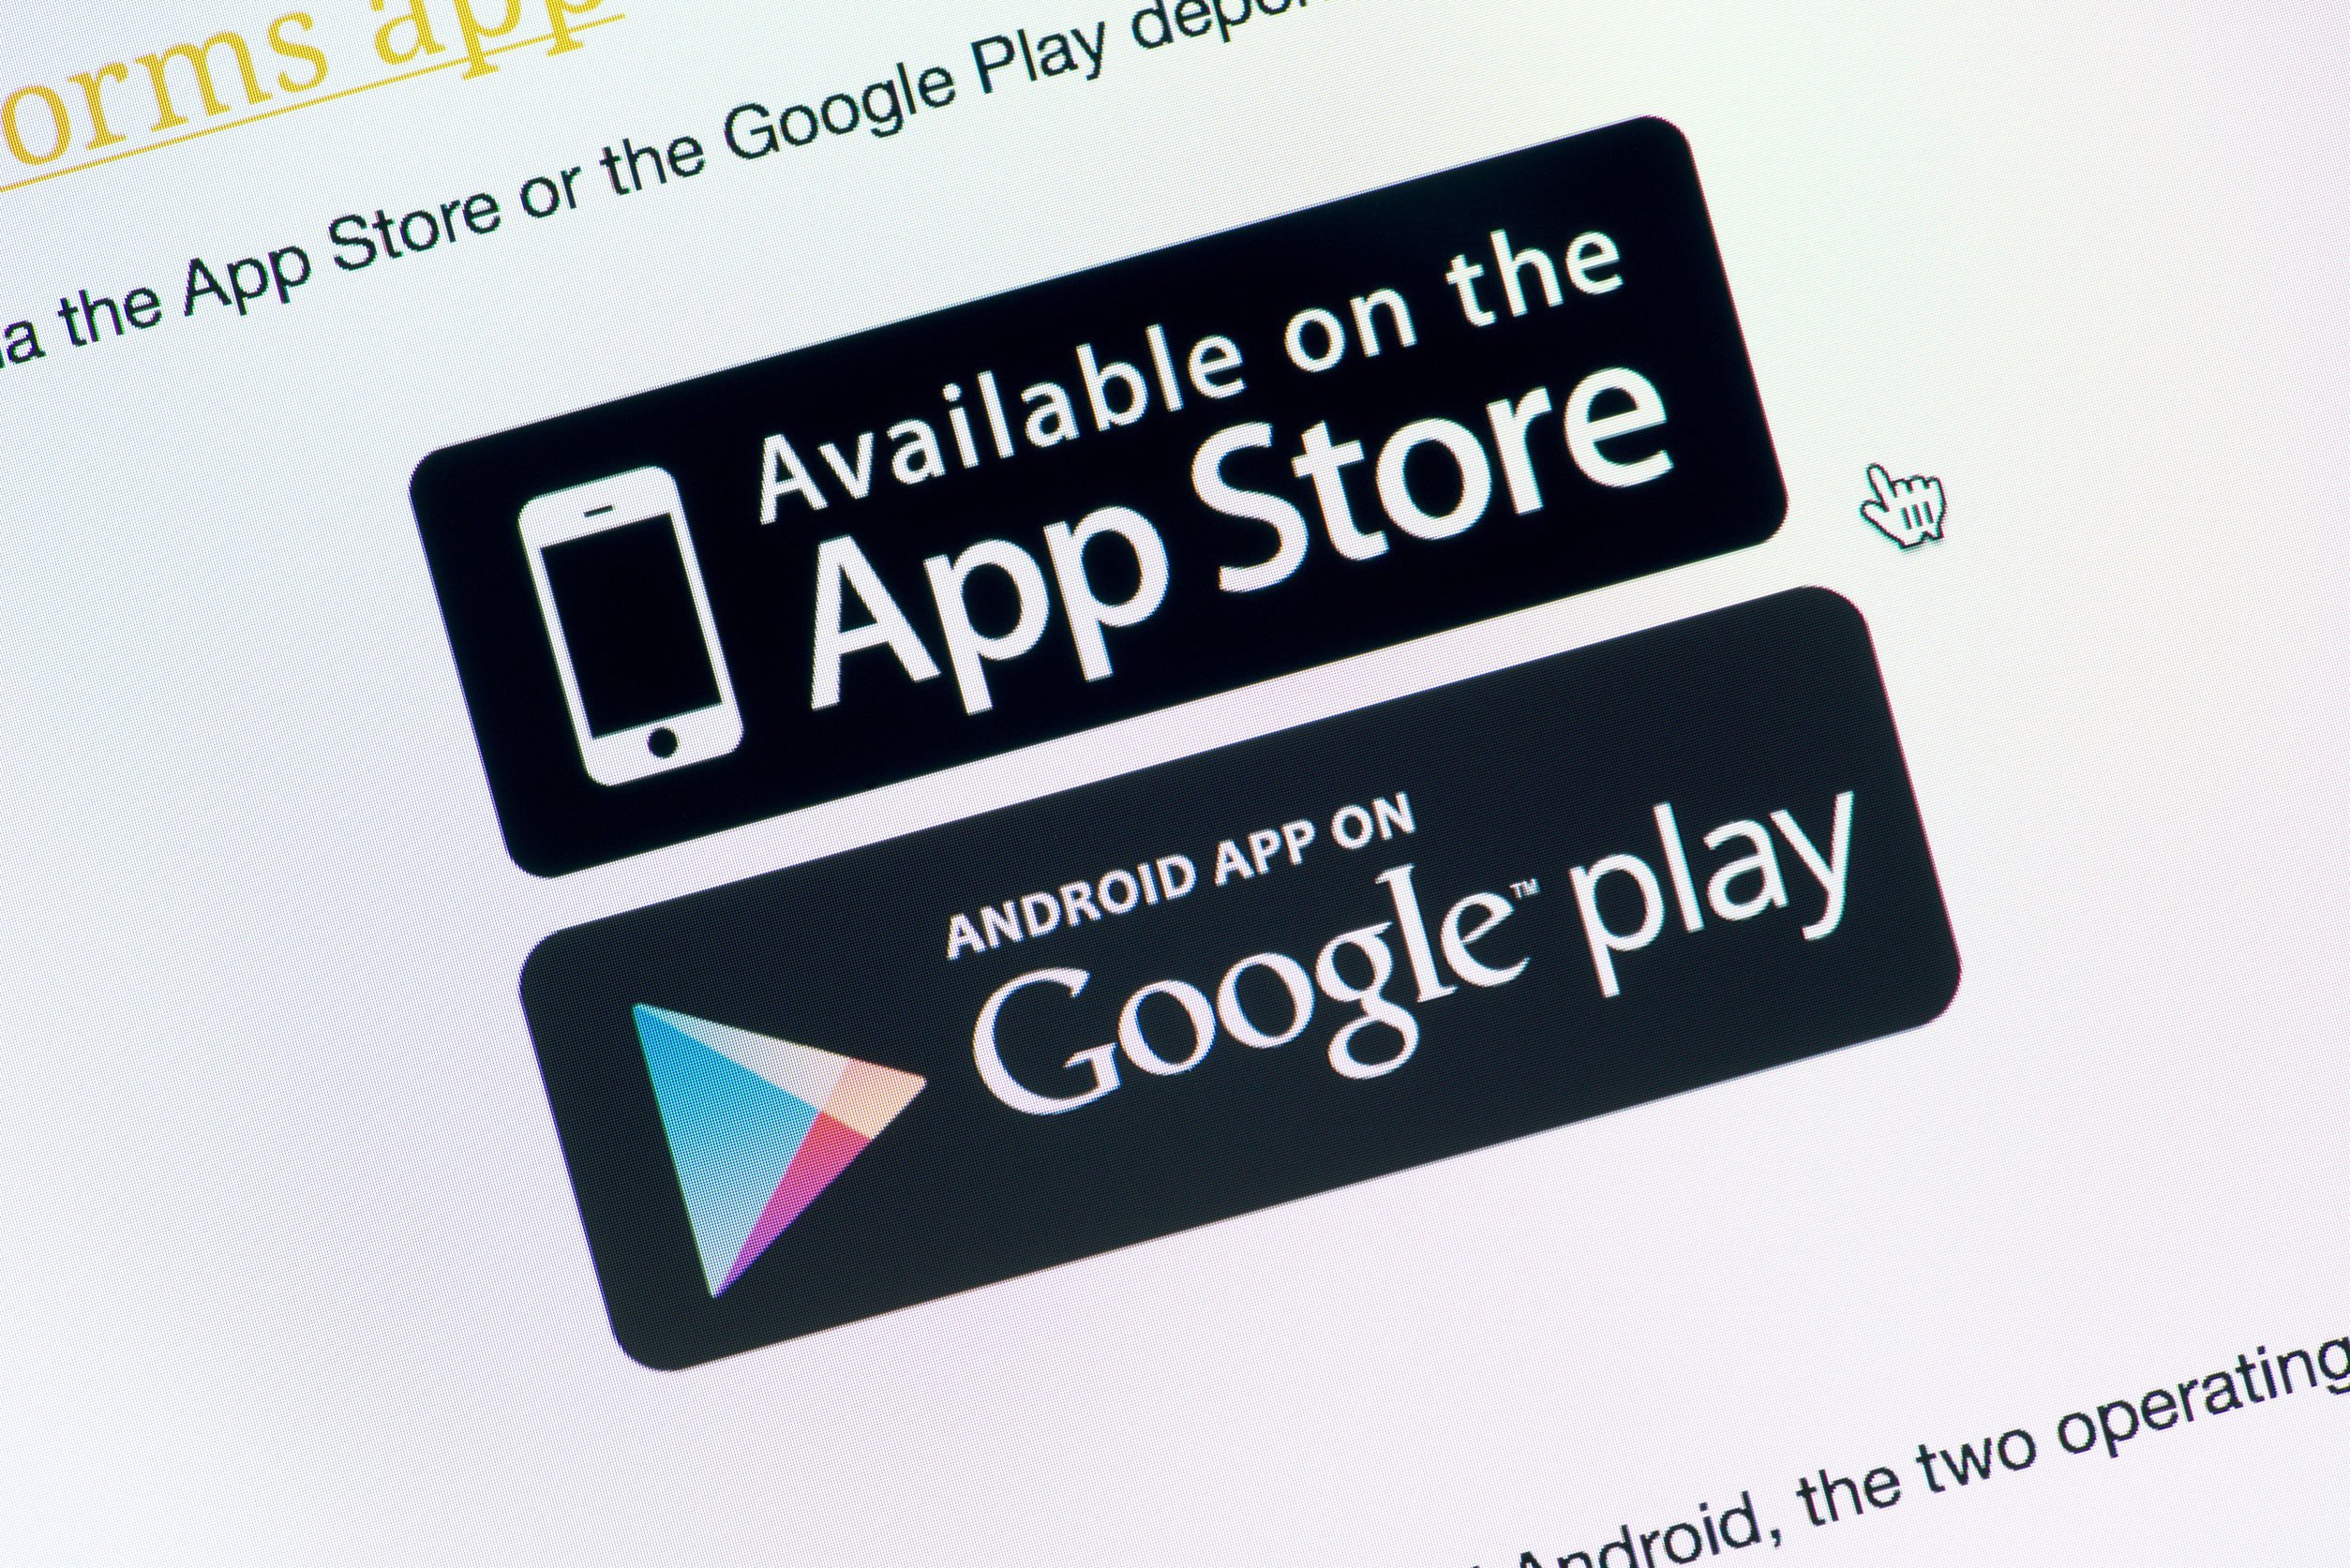 About a million applications were removed from the App Store and Google Play